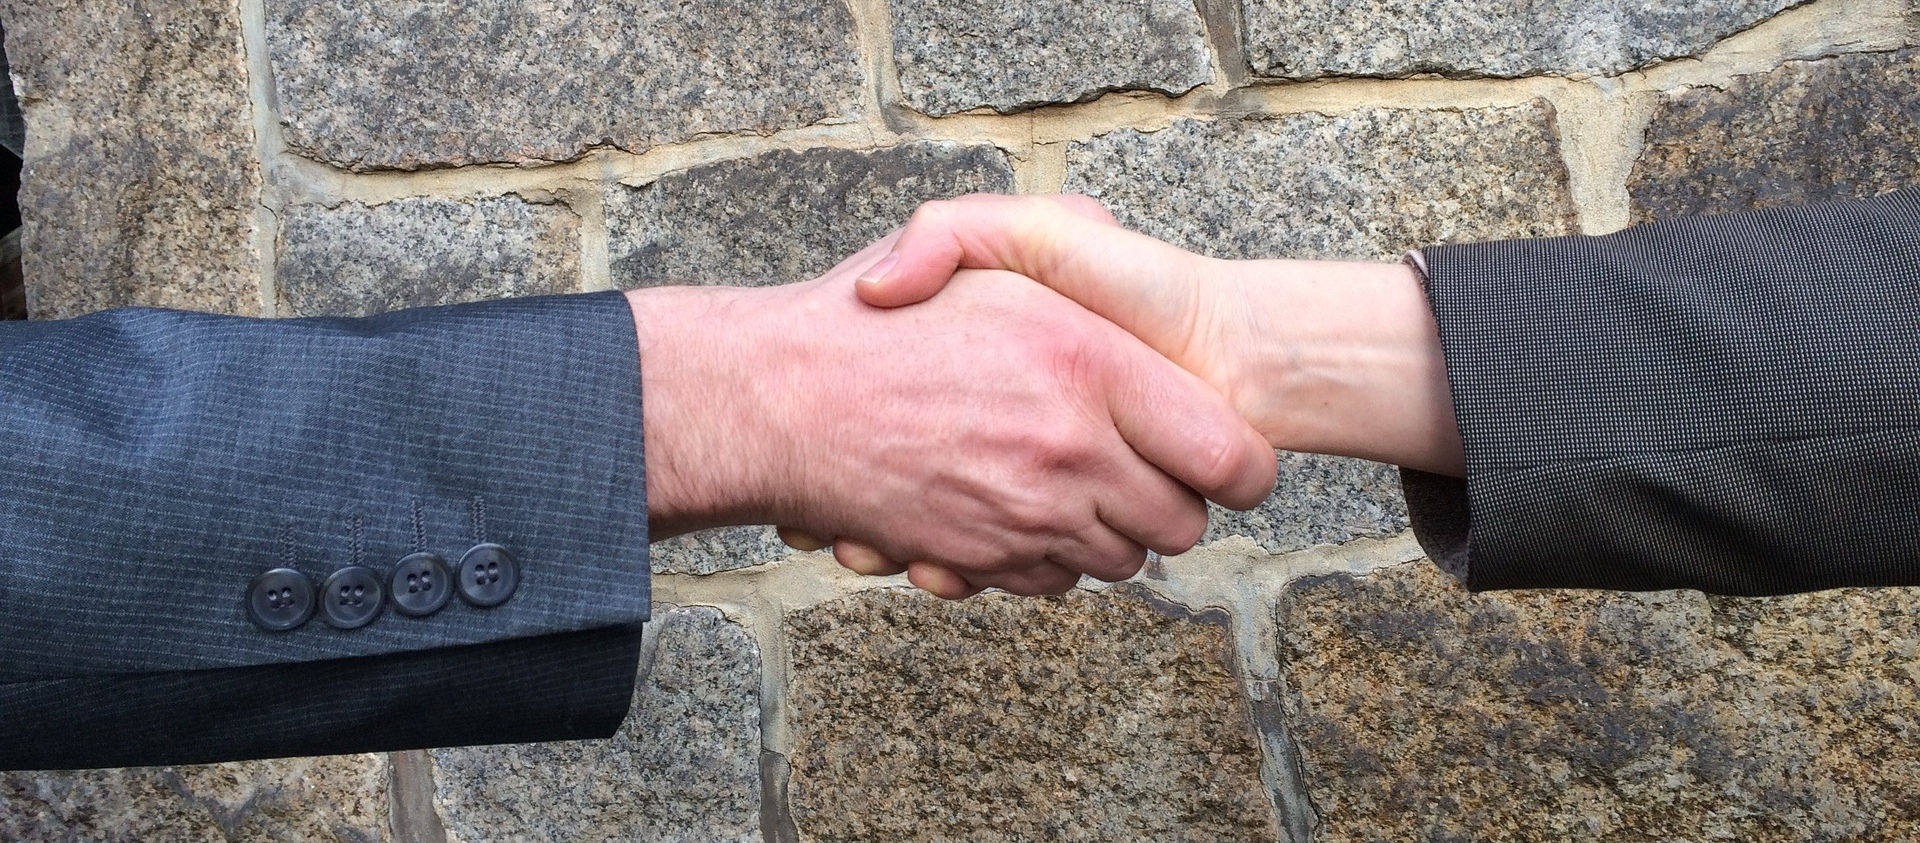 Two people shaking hands, only the arms are visible